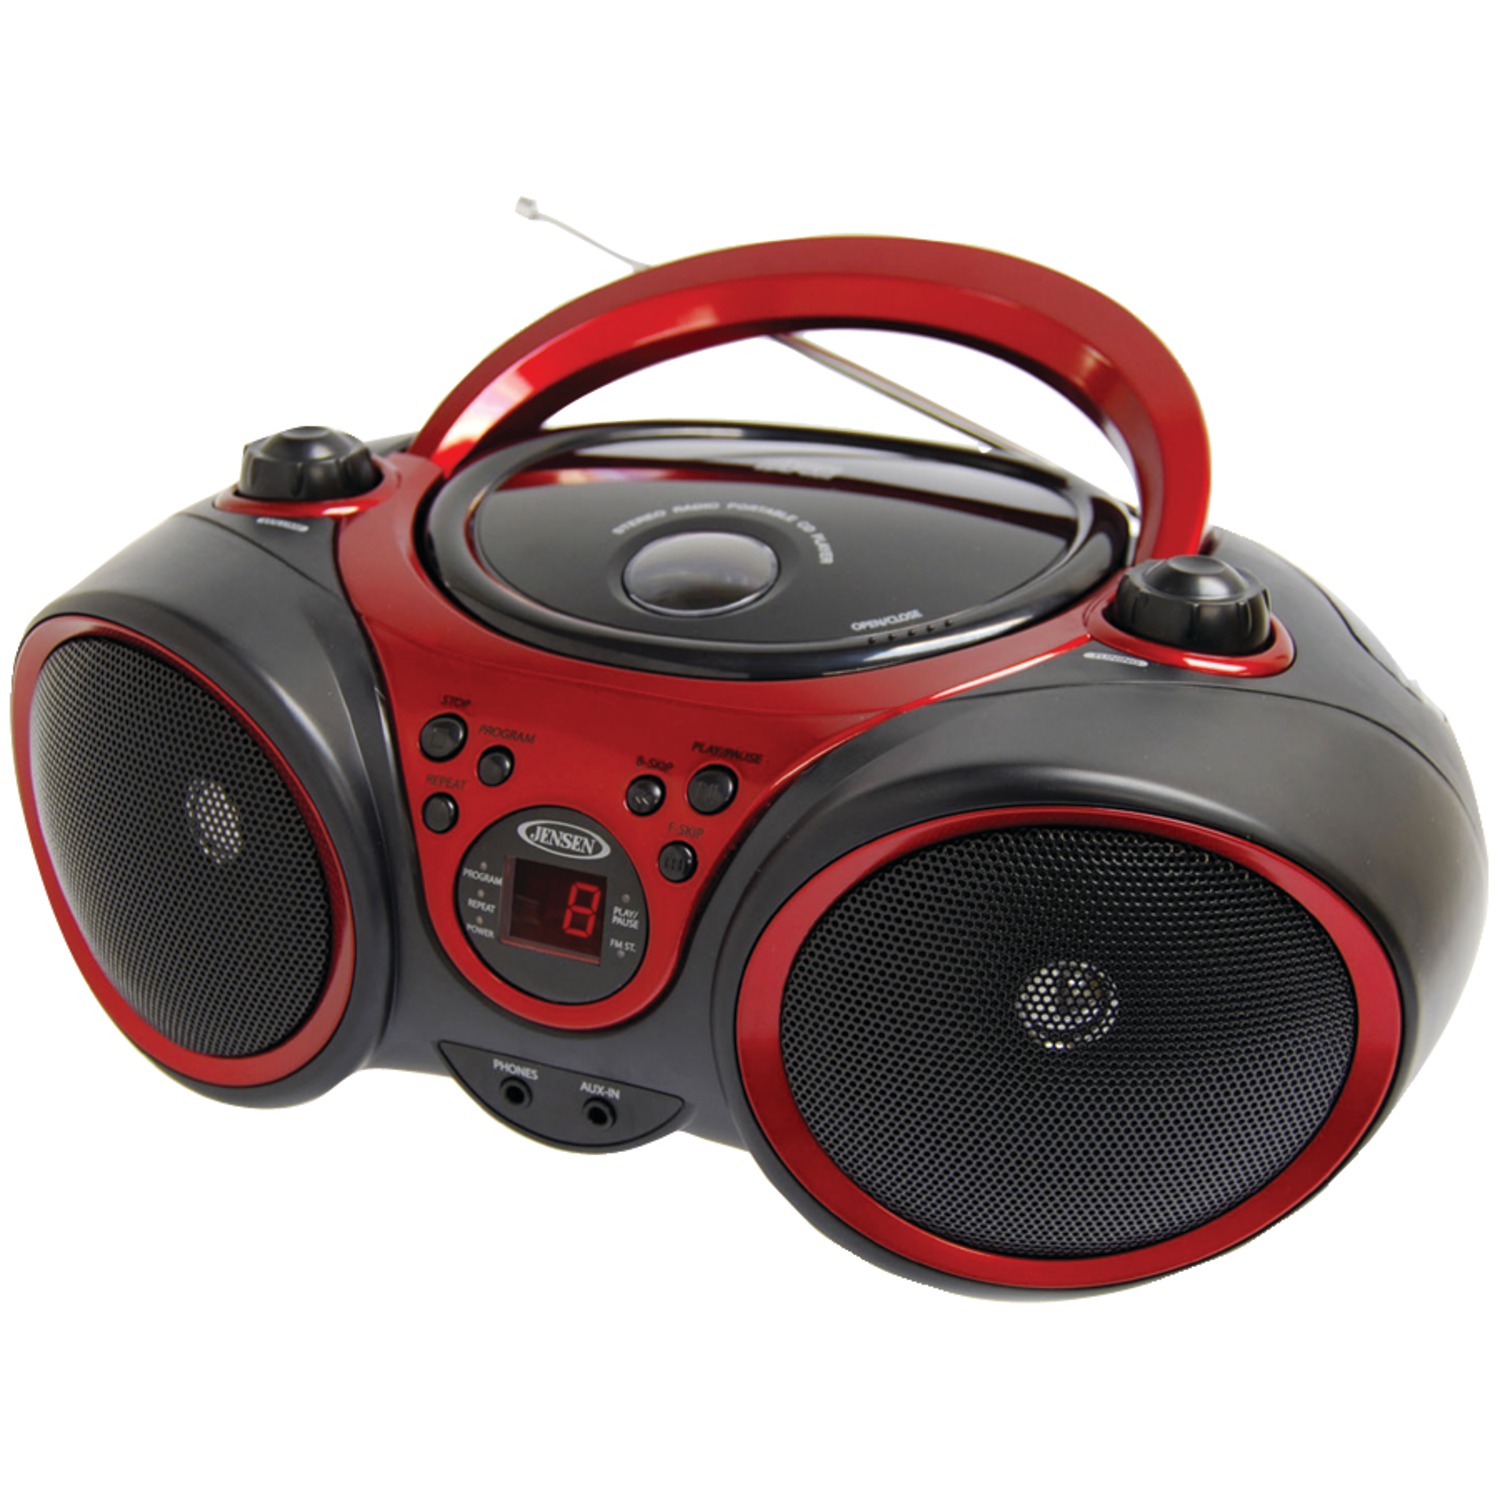 Jensen 3-Watt RMS Portable Stereo CD Player with AM/FM Stereo Radio (Red) - image 1 of 6